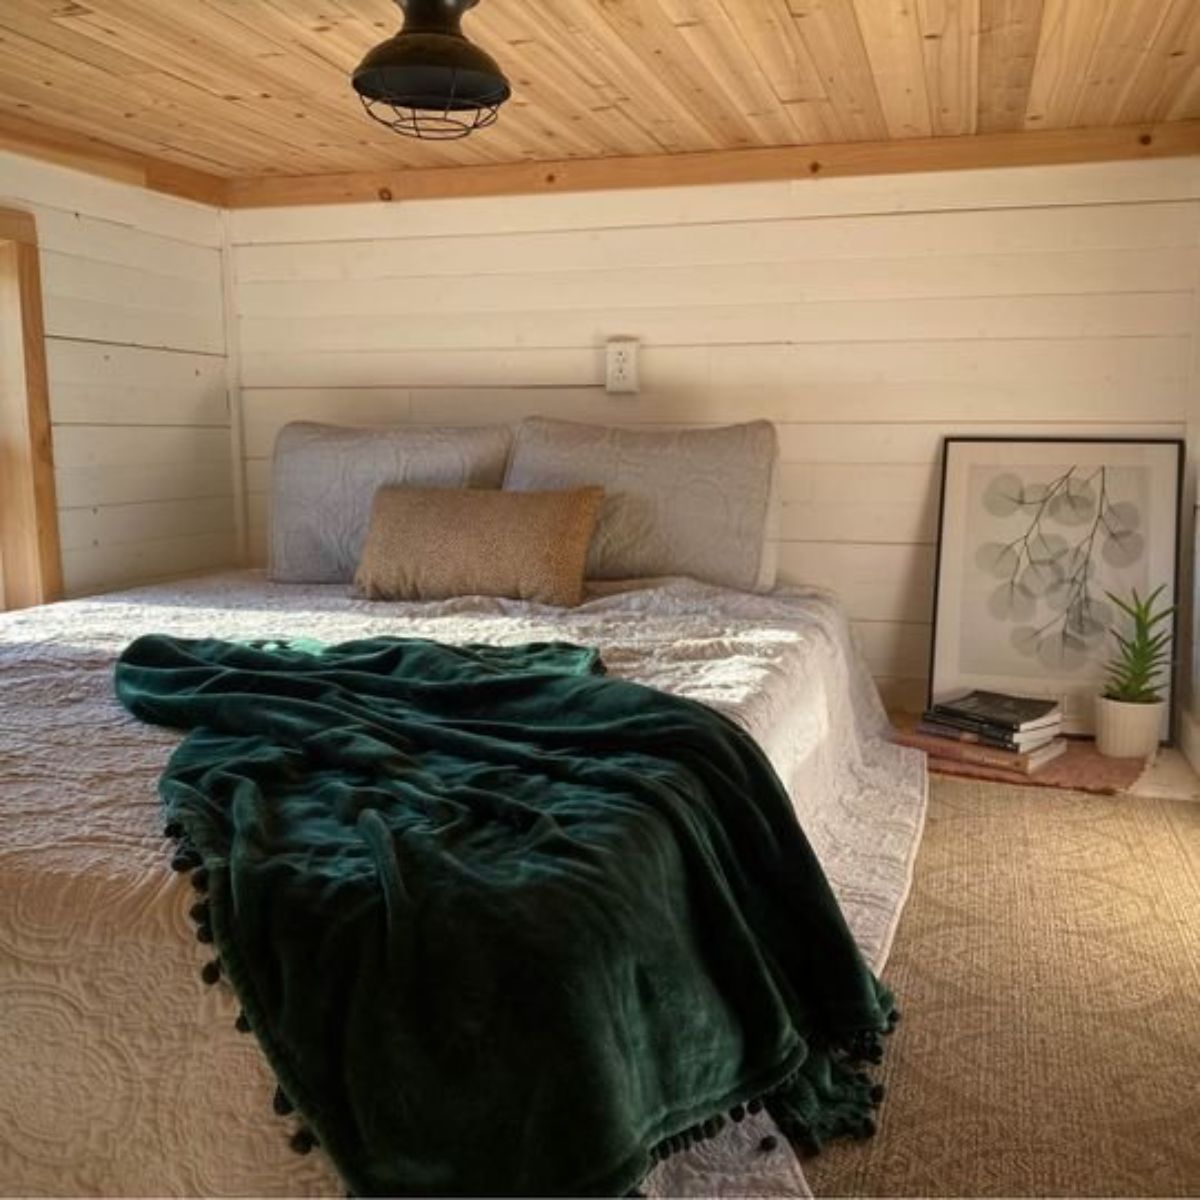 loft bedroom is very spacious and comfortable